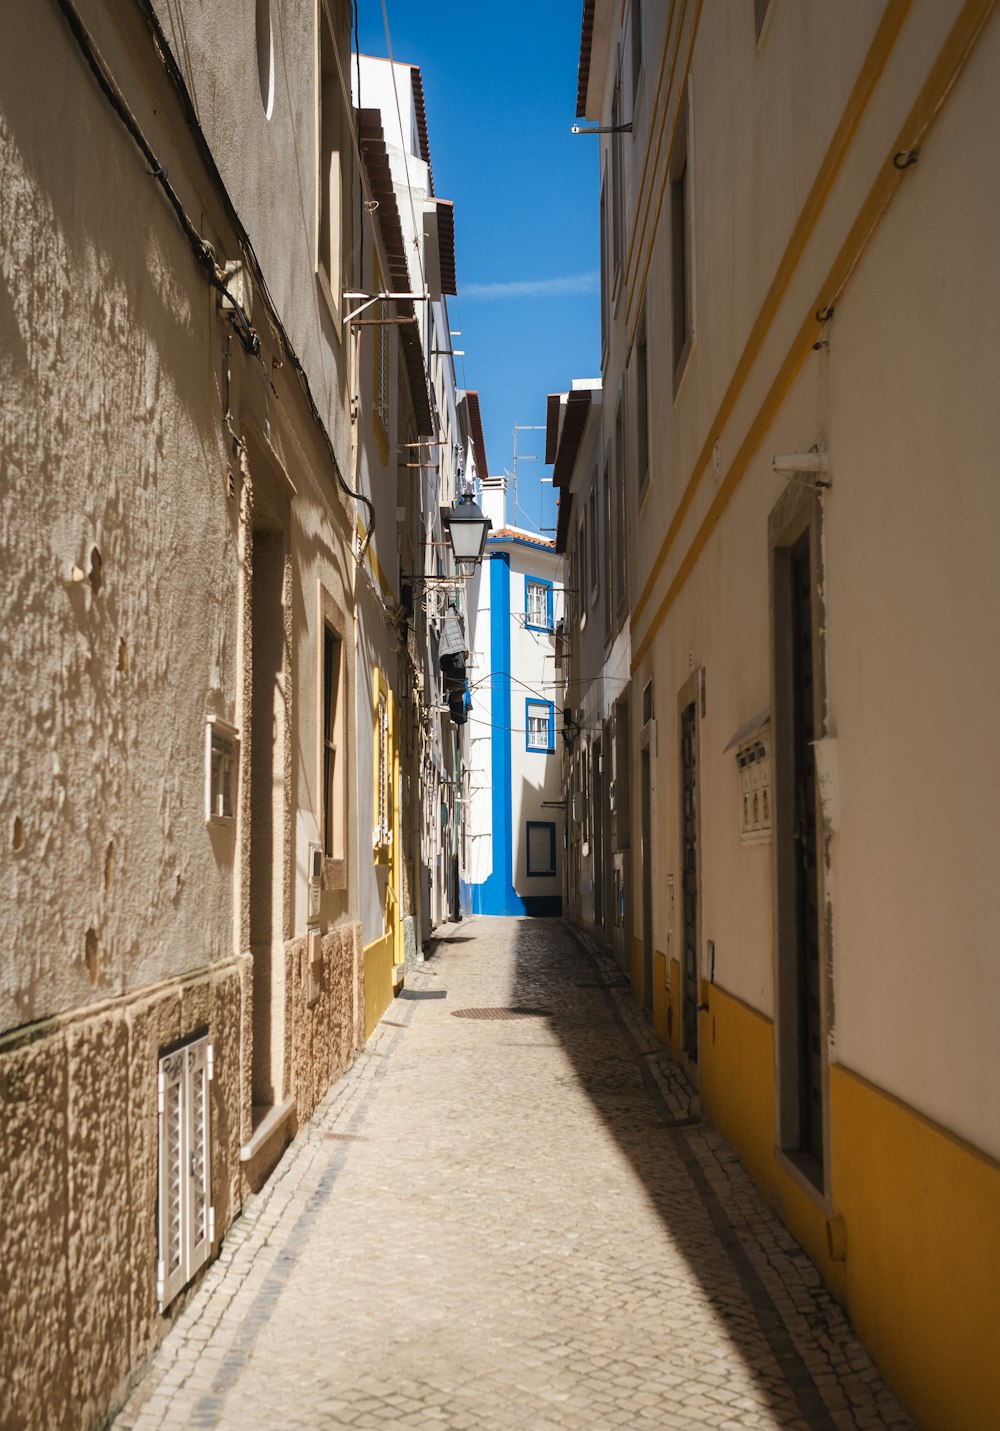 a narrow street with a blue building in the background